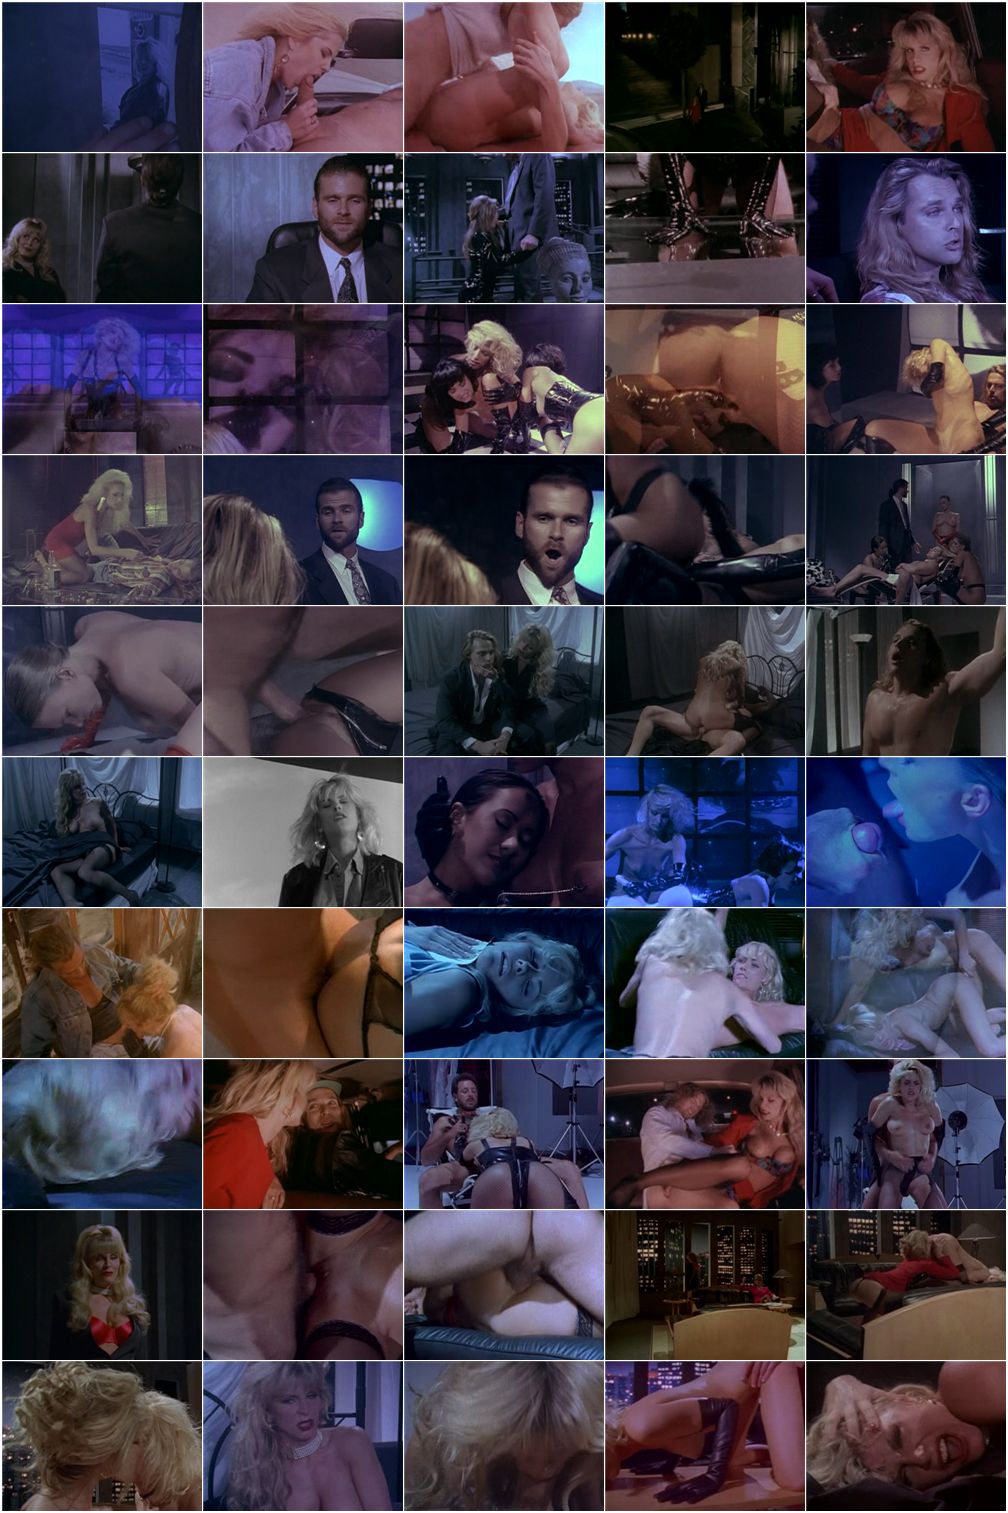  1-2 /Sex 1-2/ VCA Pictures (1994)    